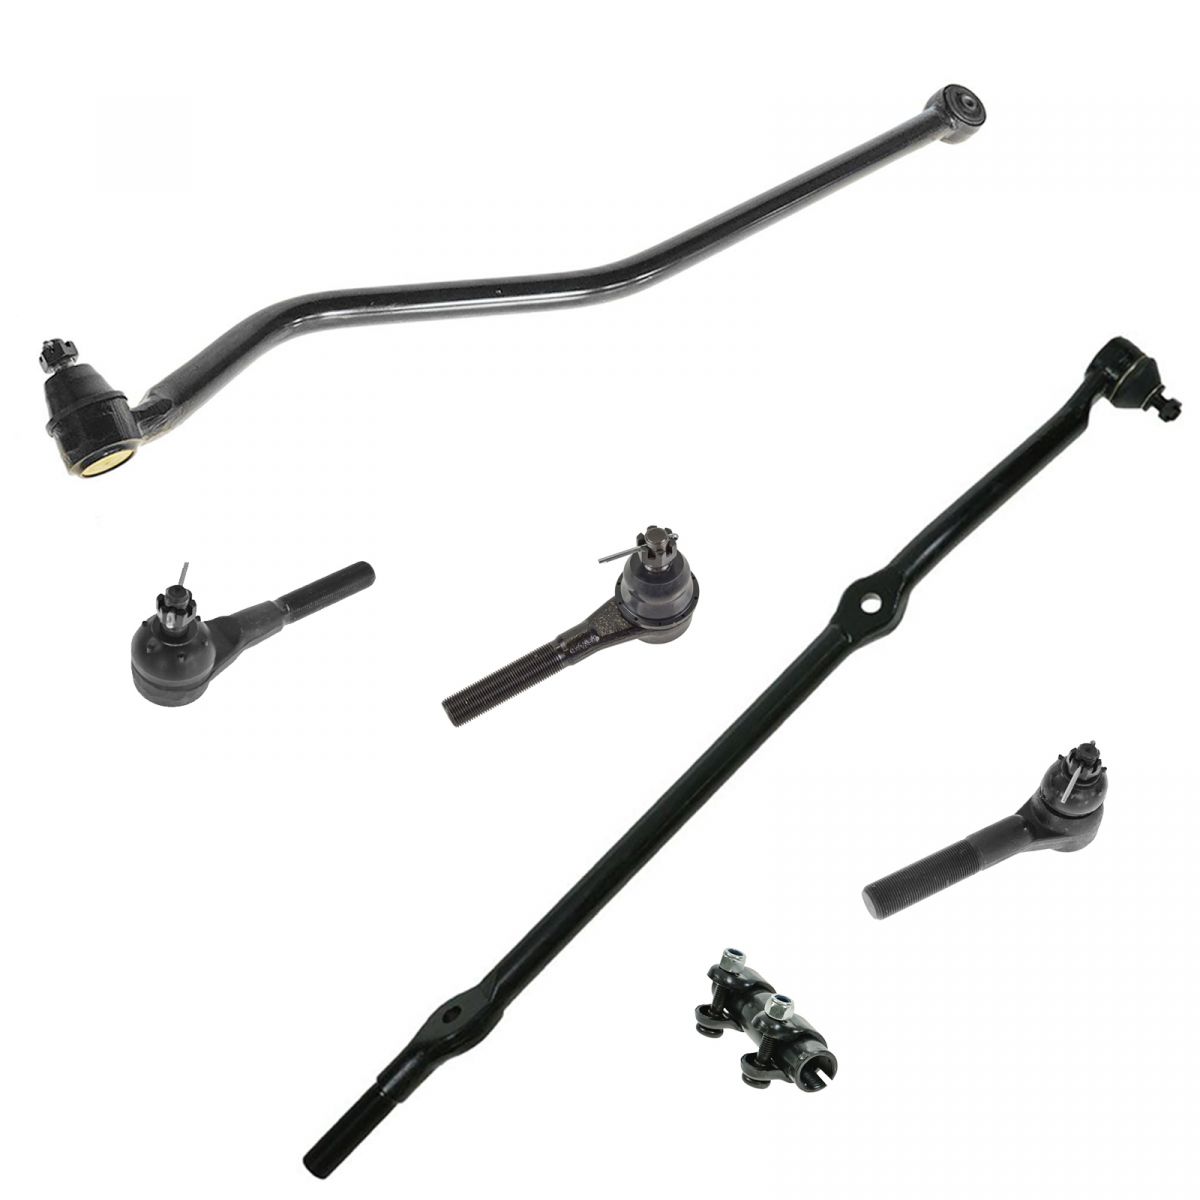 Front Tie Rods Drag Link & Track Bar Kit Set for 93-98 Jeep Grand Cherokee 4.0L